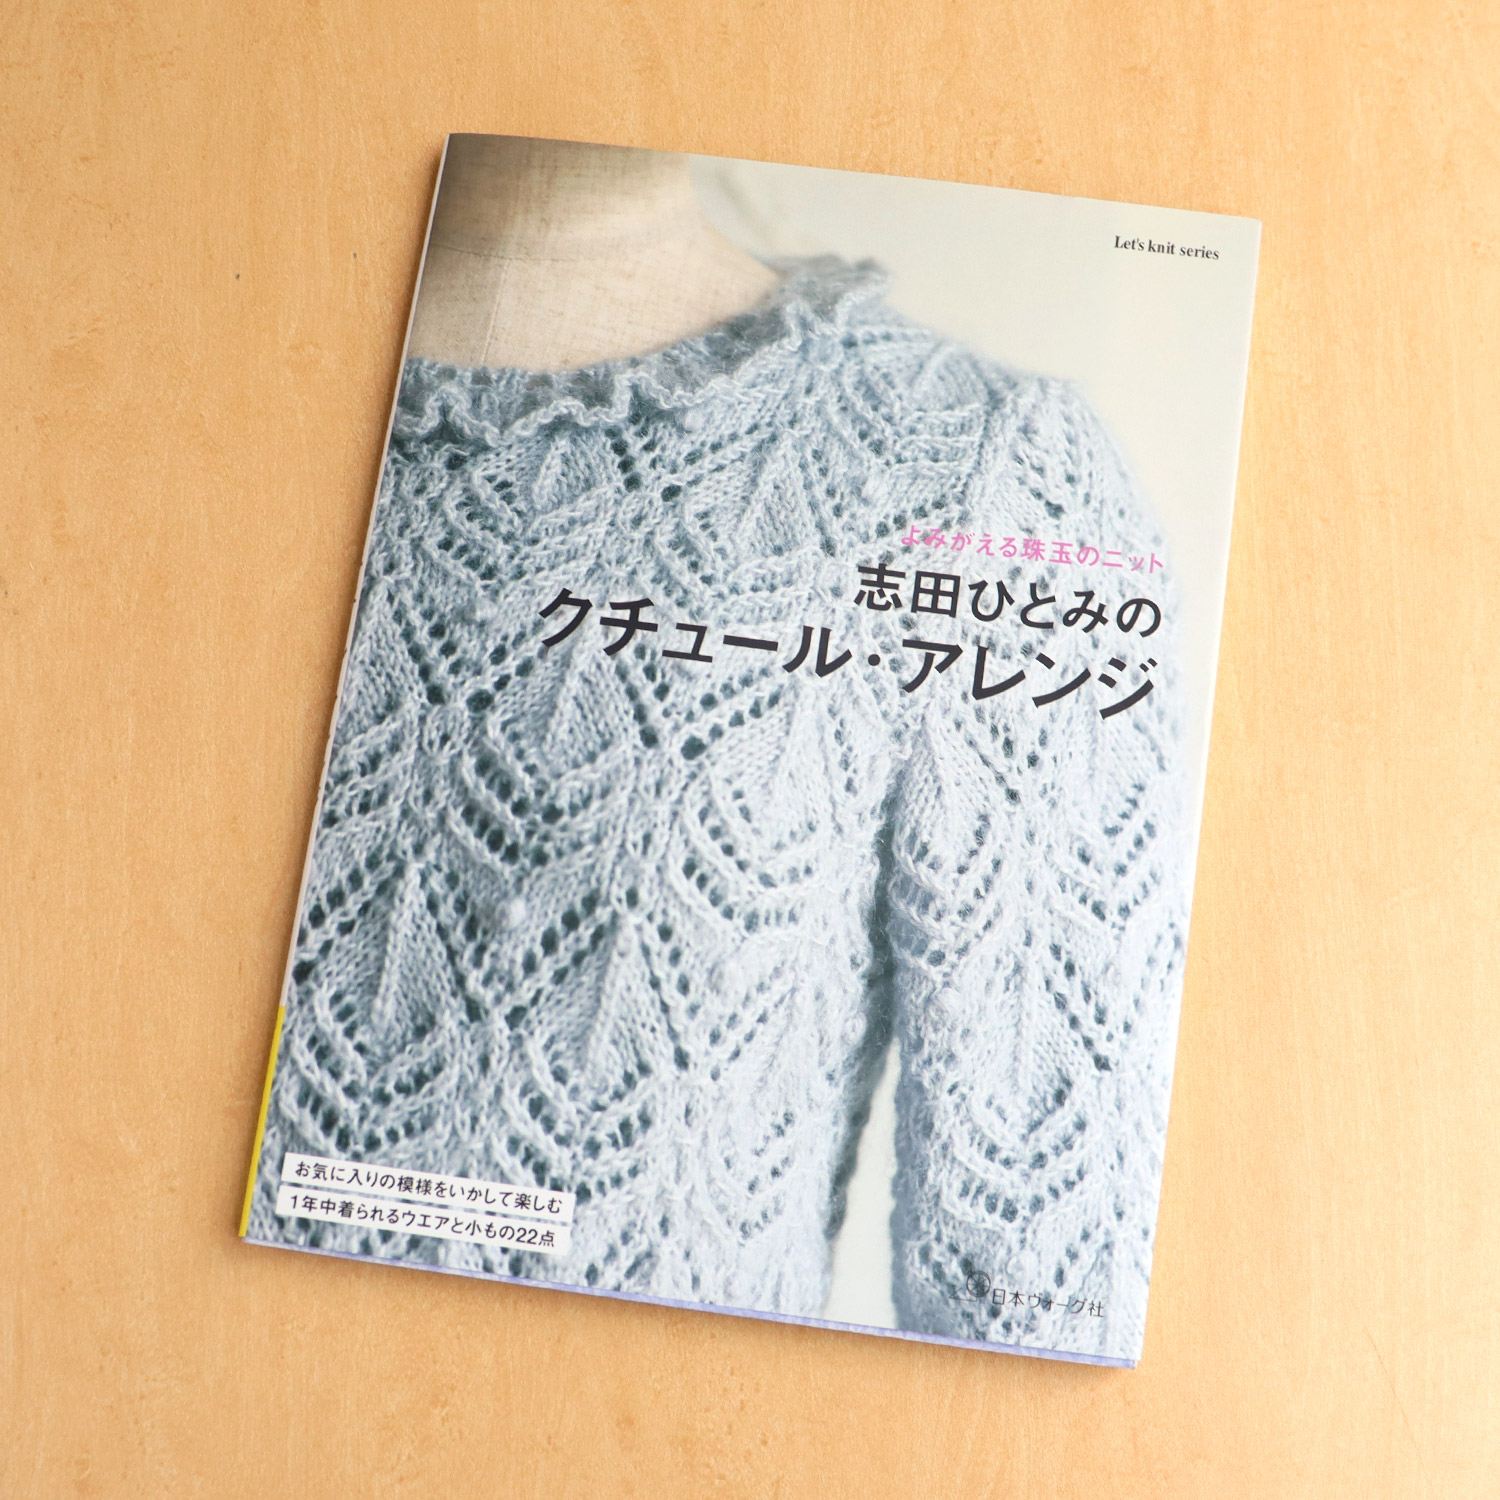 NV80777 Couture Arrangements by Hitomi Shida(book)